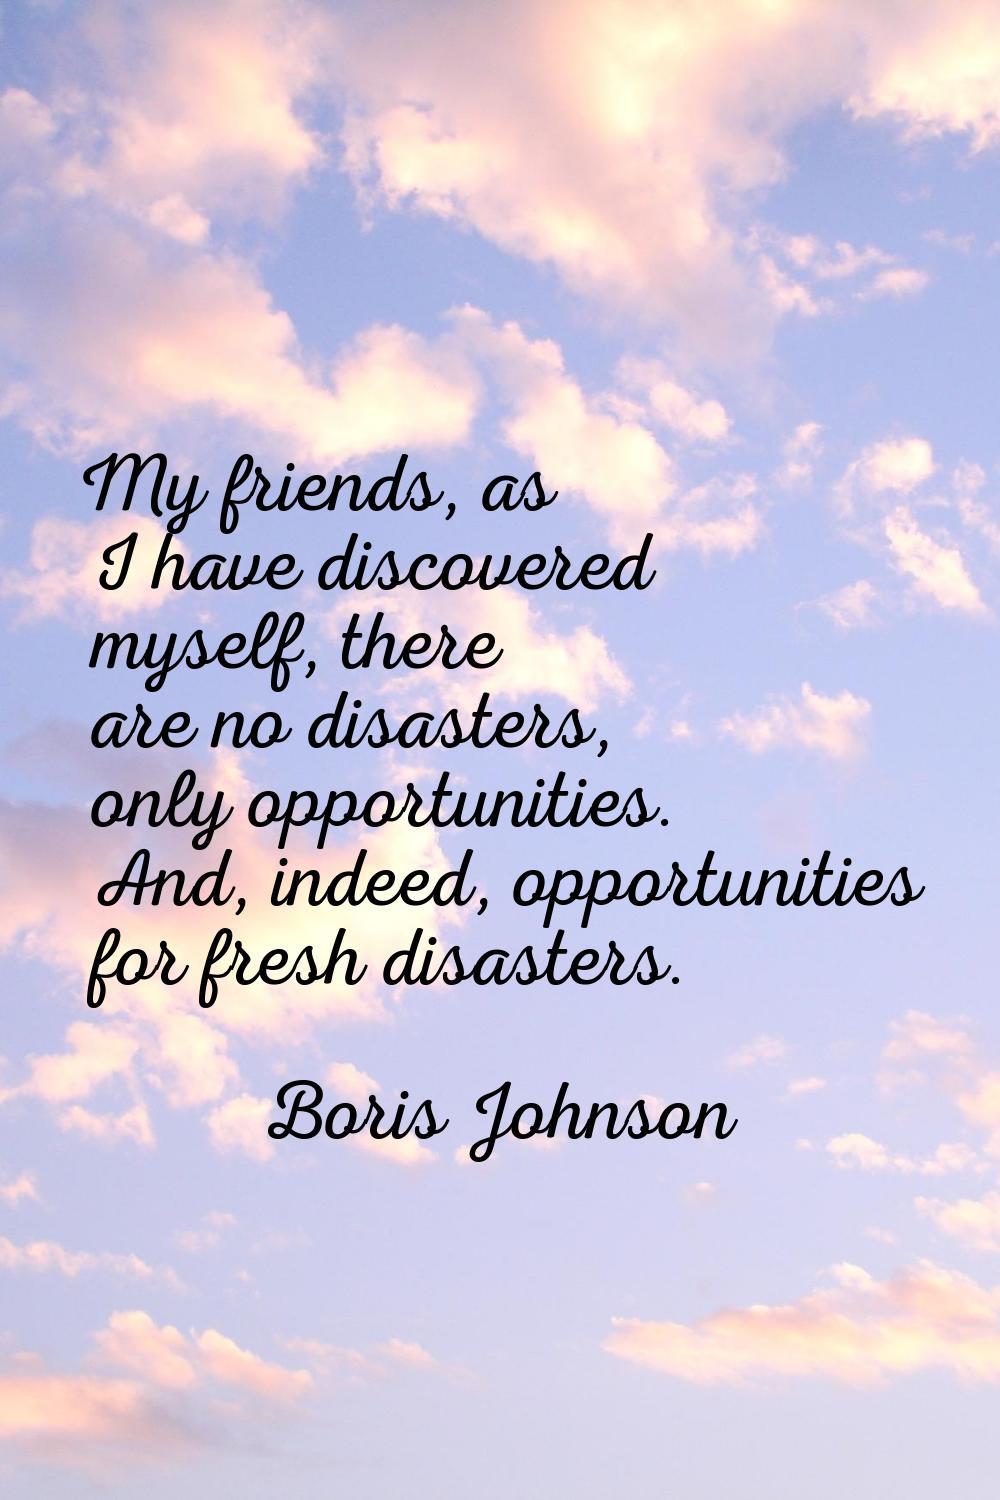 My friends, as I have discovered myself, there are no disasters, only opportunities. And, indeed, o